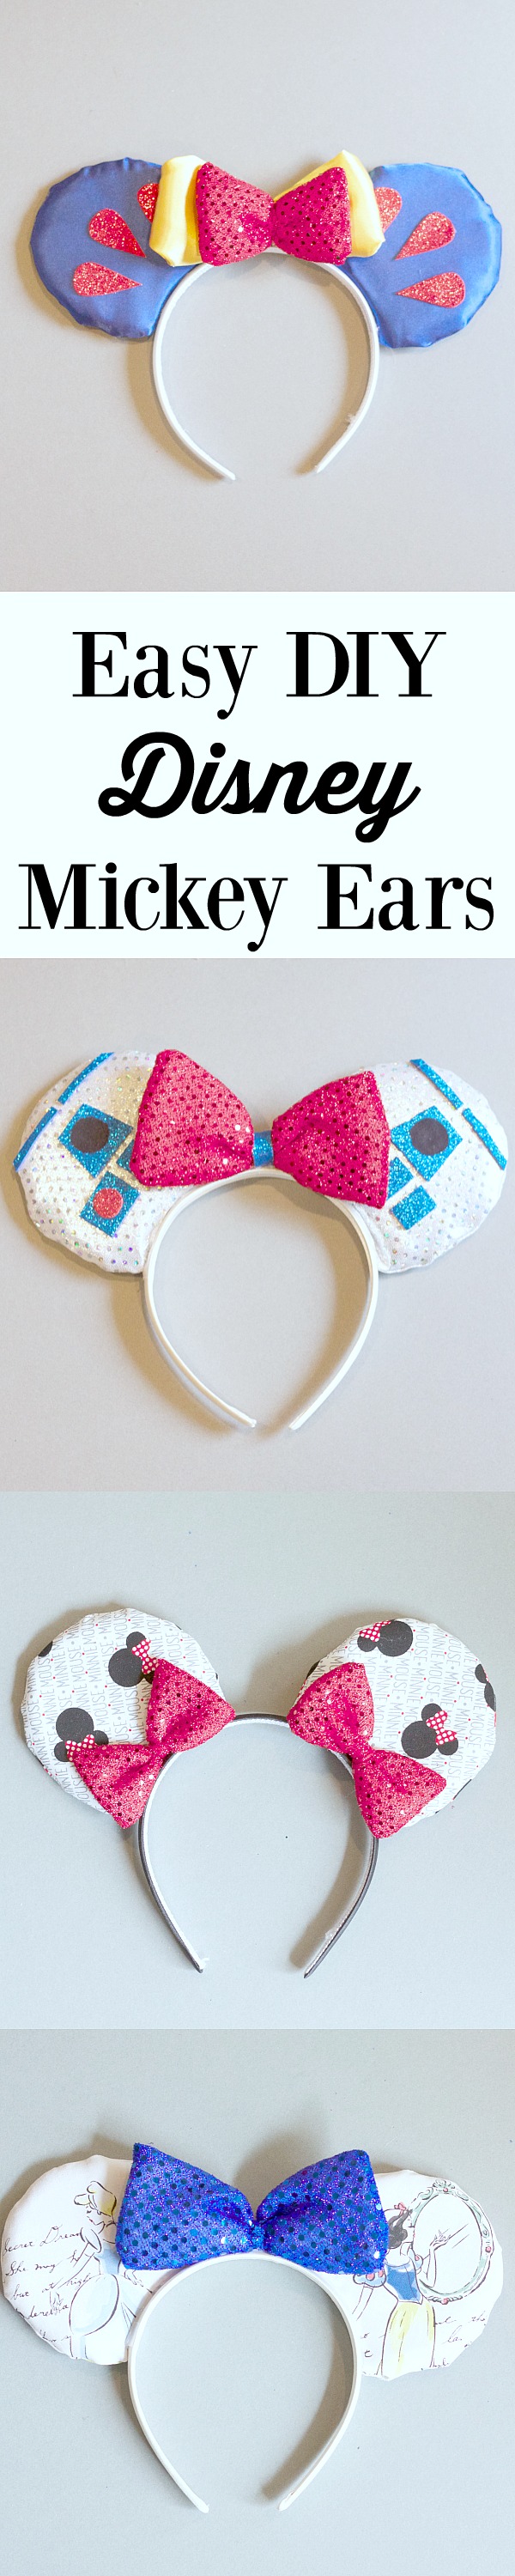 Easy DIY Disney Mickey Ears- this tutorial is super easy to follow. Easiest Mickey Ear Tutorial I have seen.